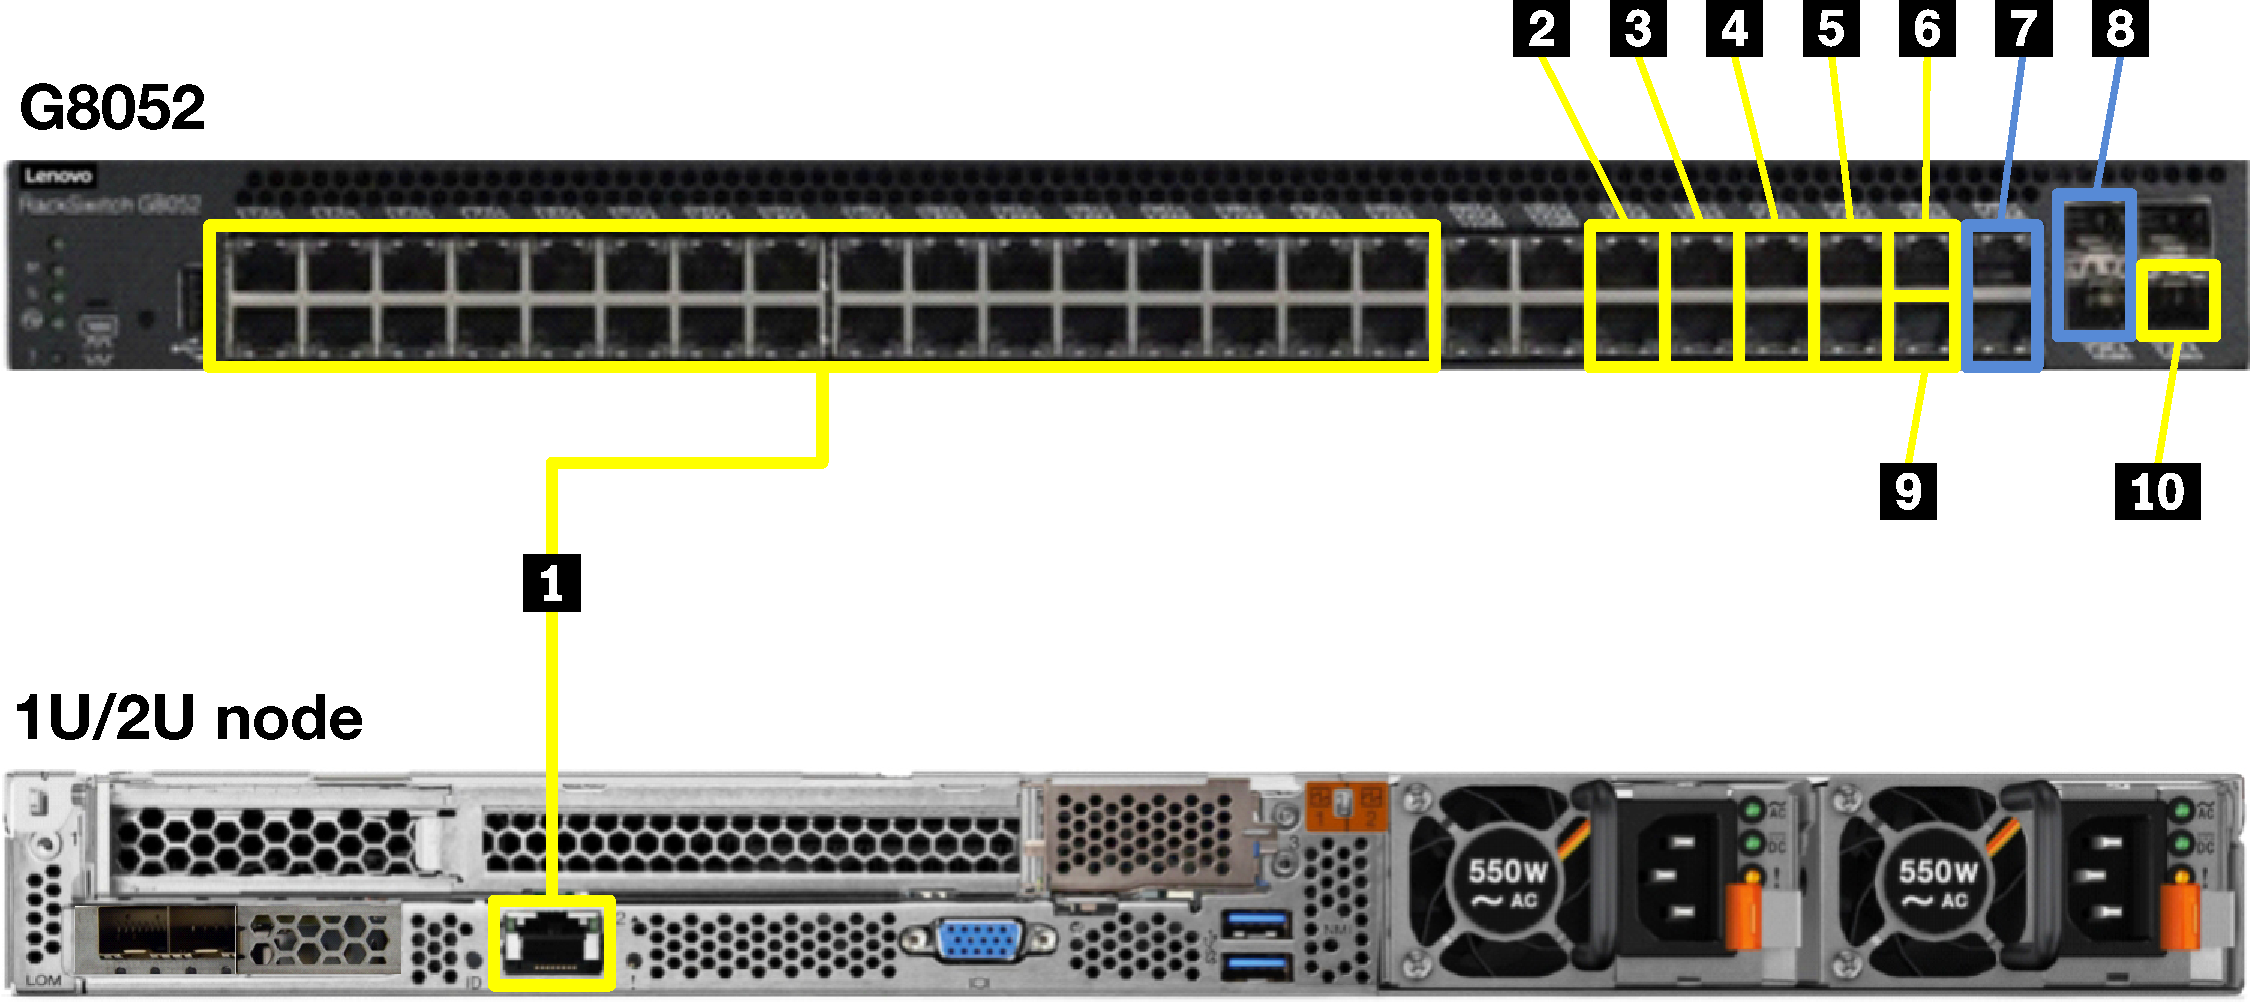 Graphic showing RackSwitch G8052 cabling for 1U and 2U appliances (SXN3000 only)